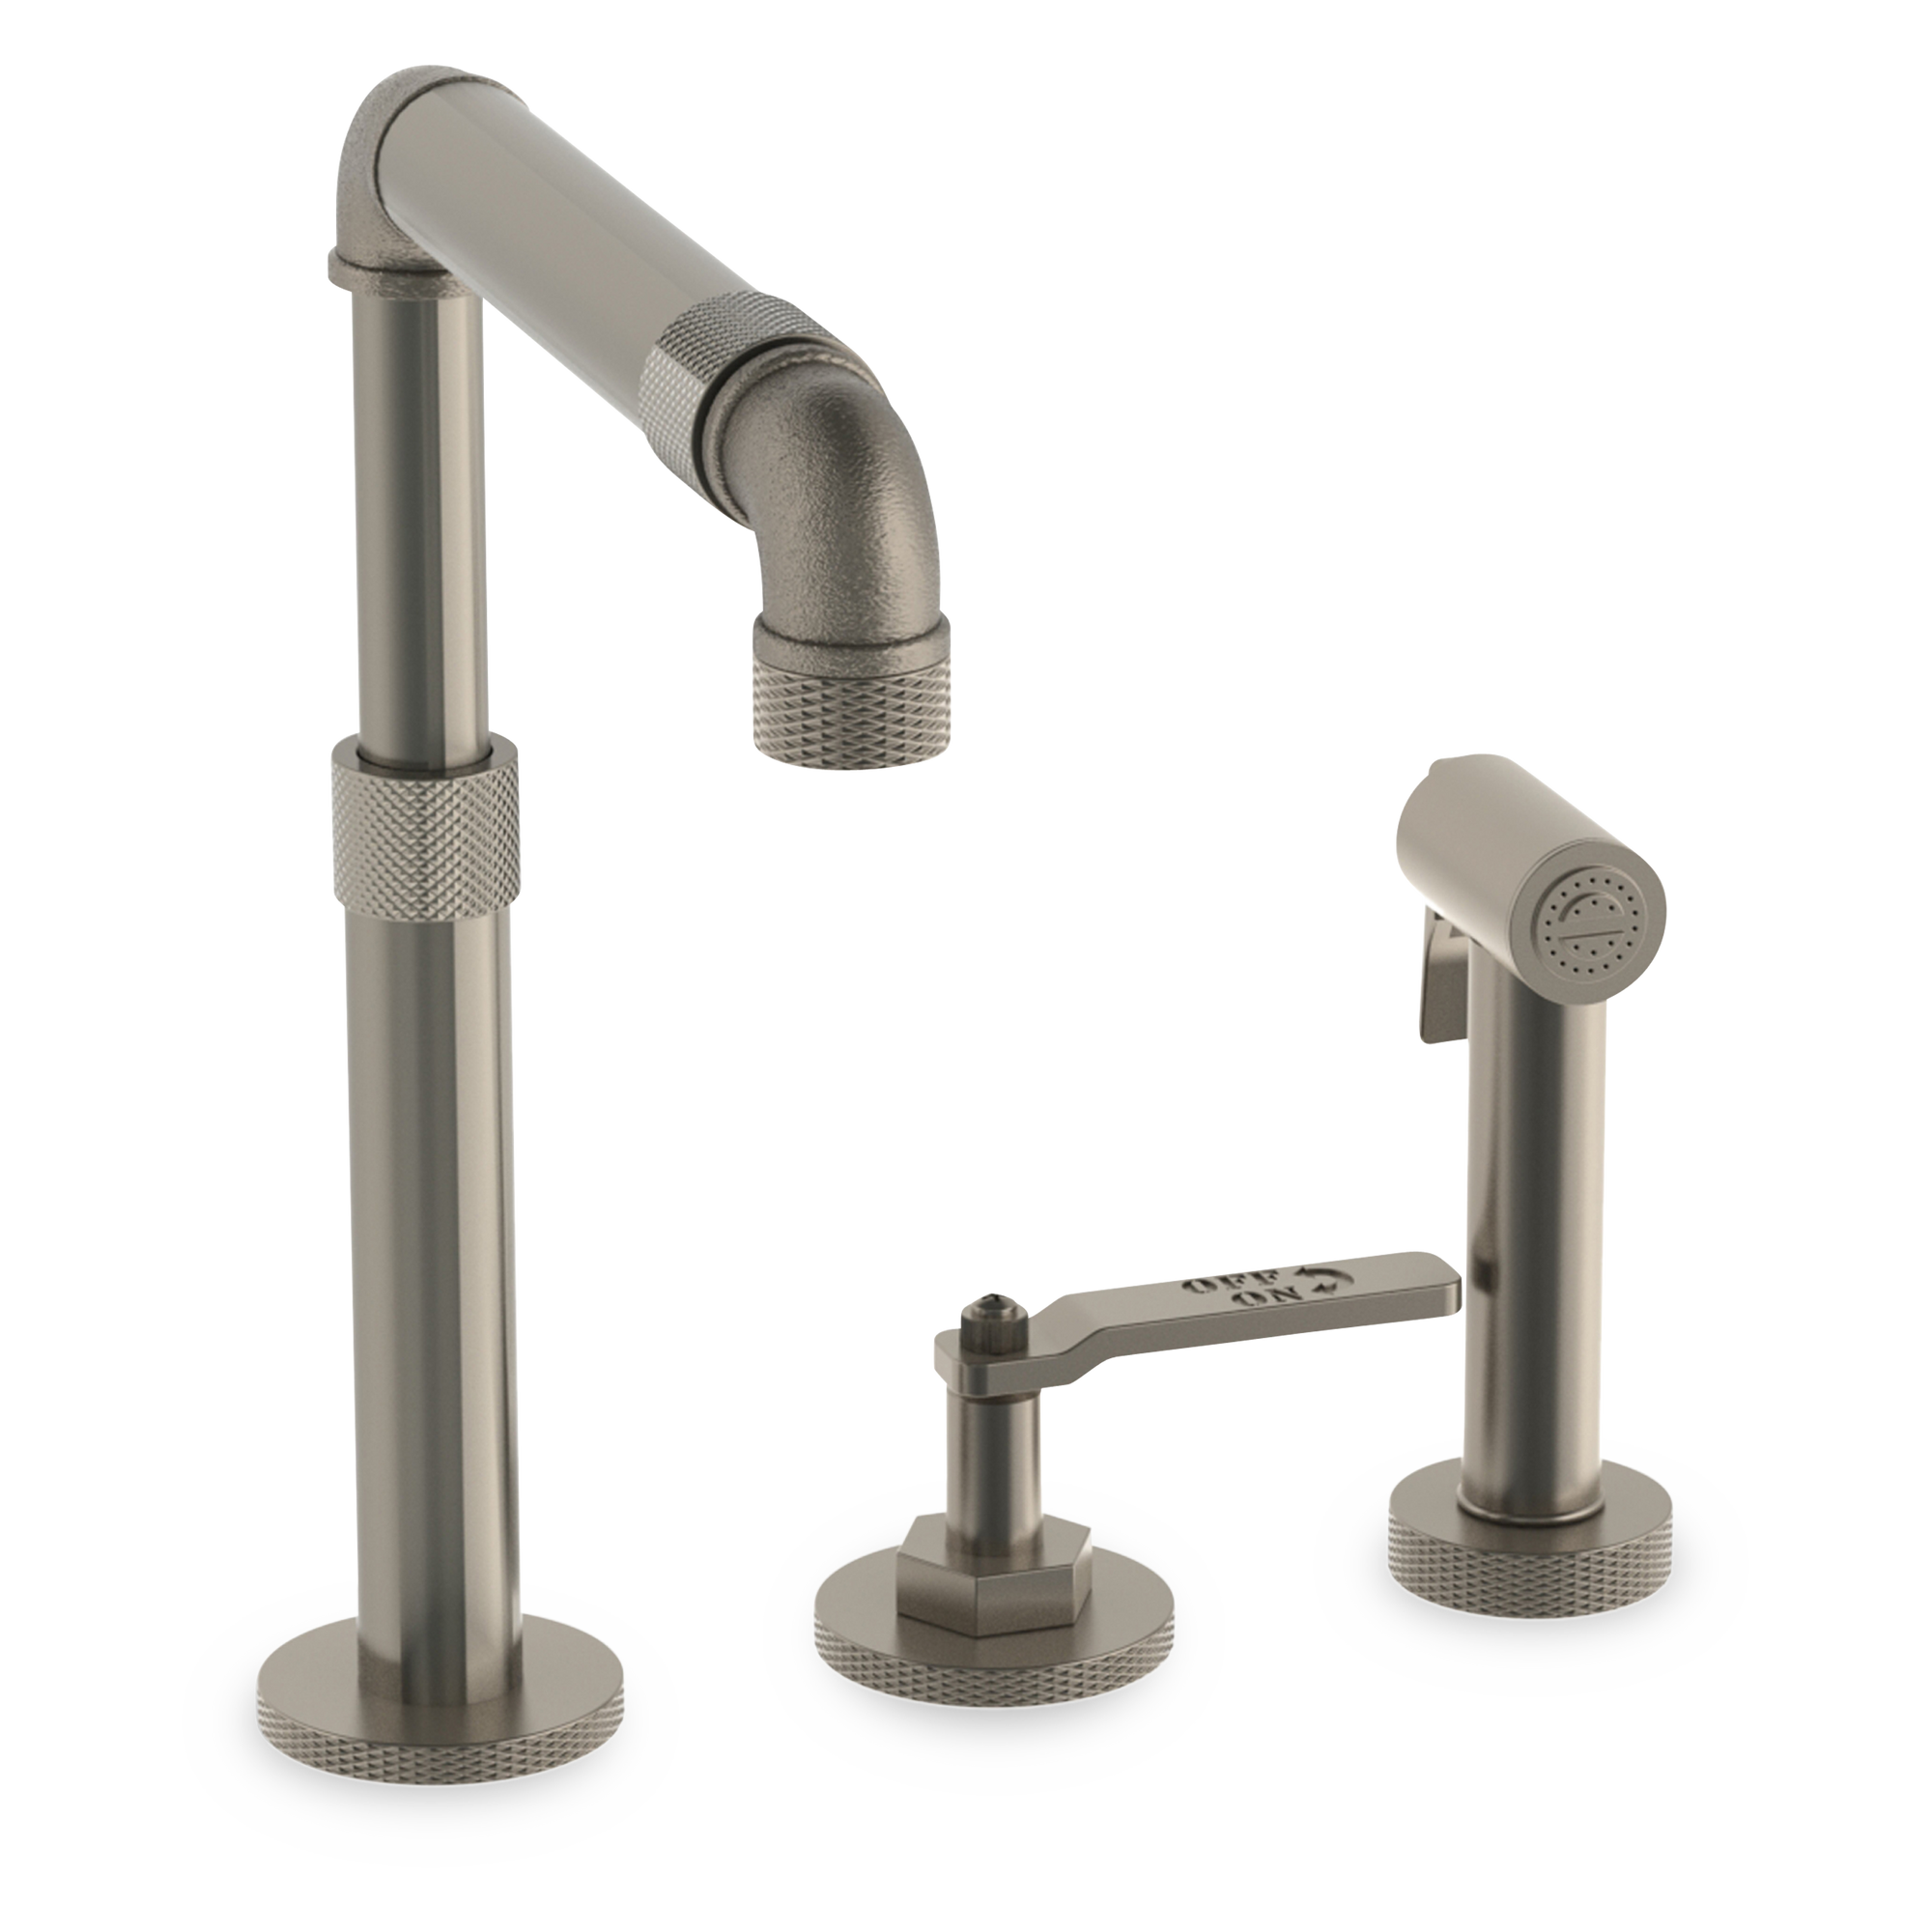 A unique industrial style kitchen faucet featured in a gorgeous pewter finish.